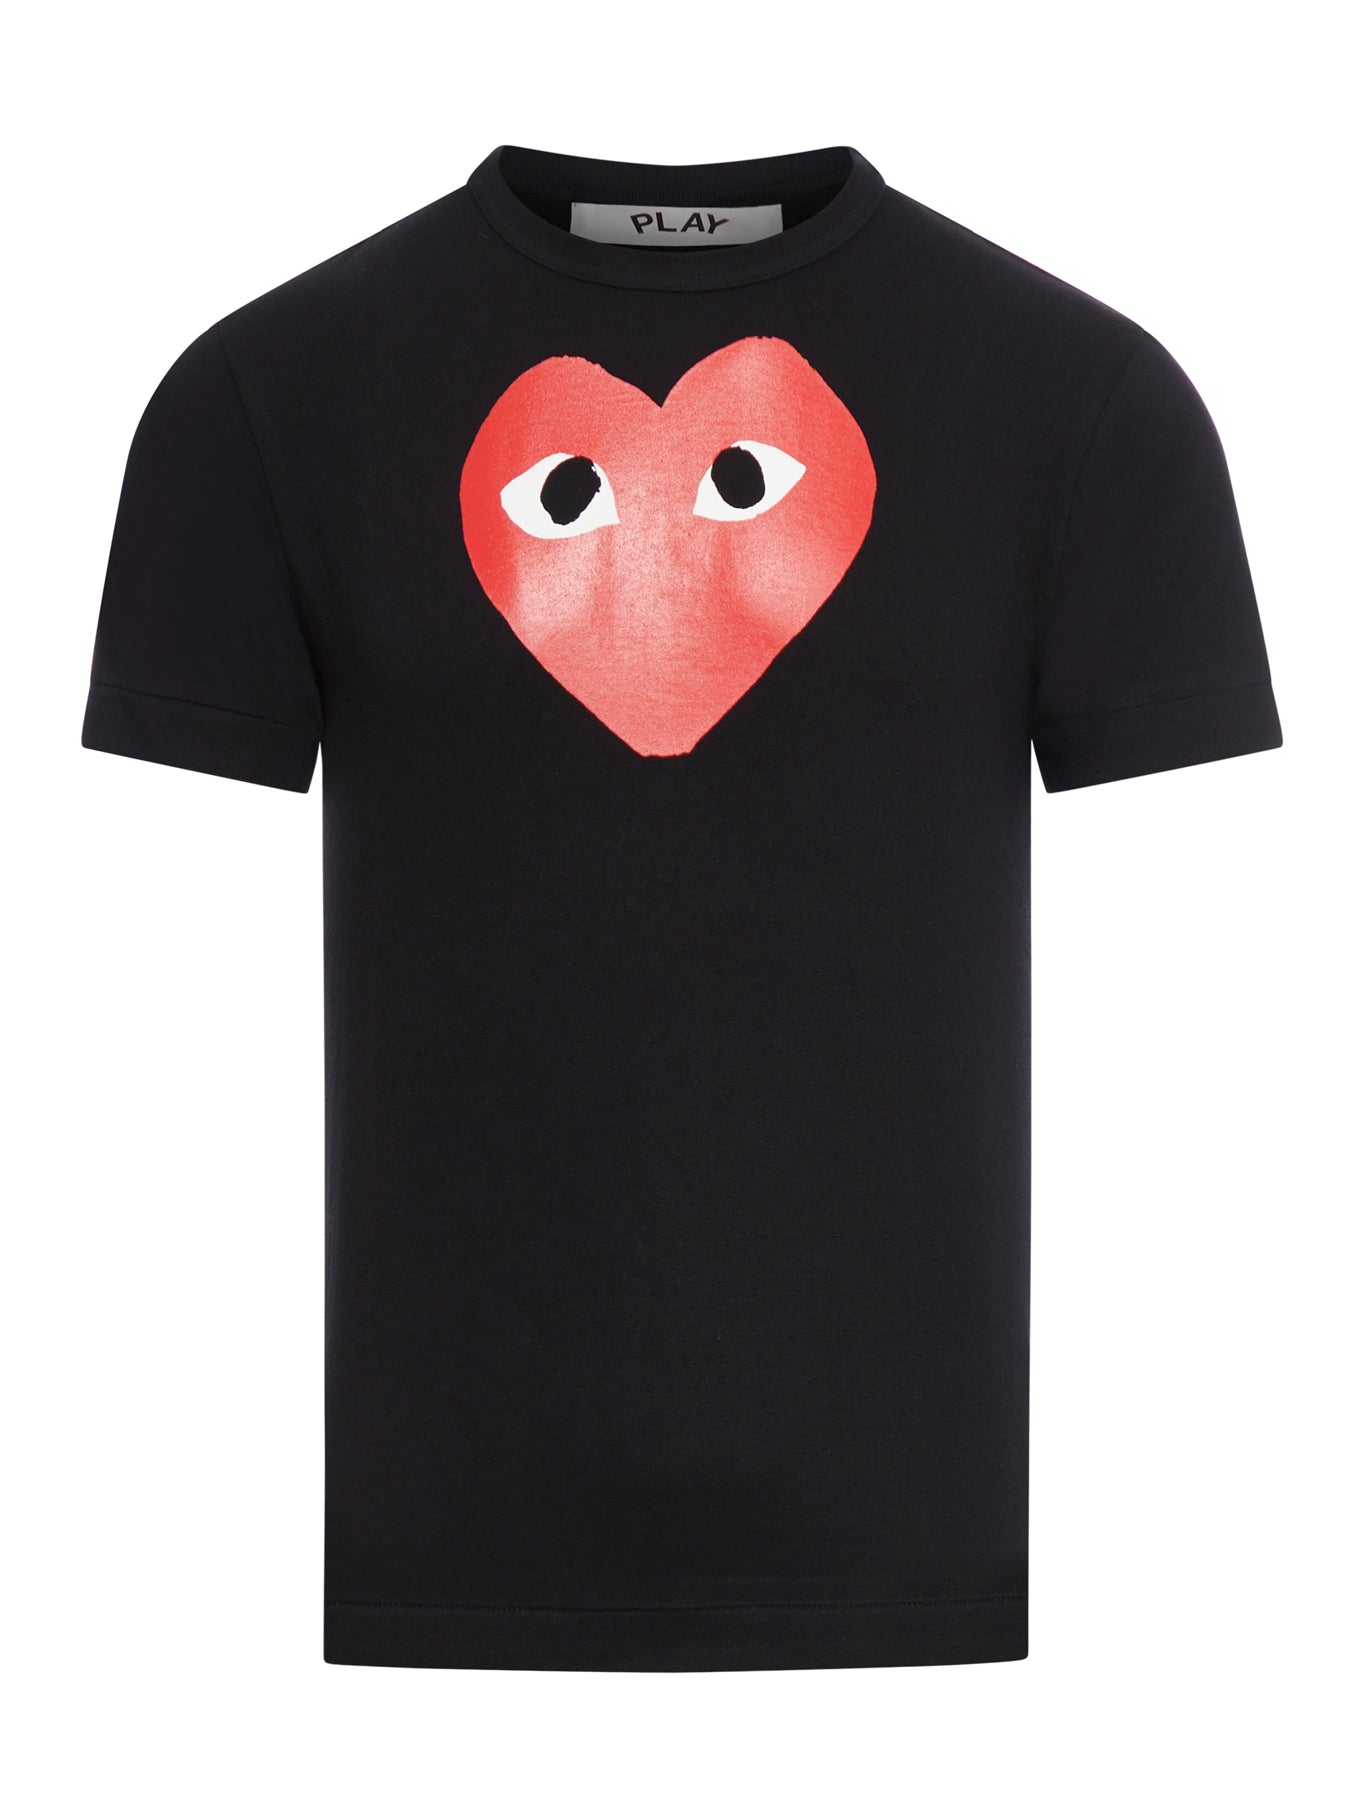 T-SHIRT CON STAMPA CUORE